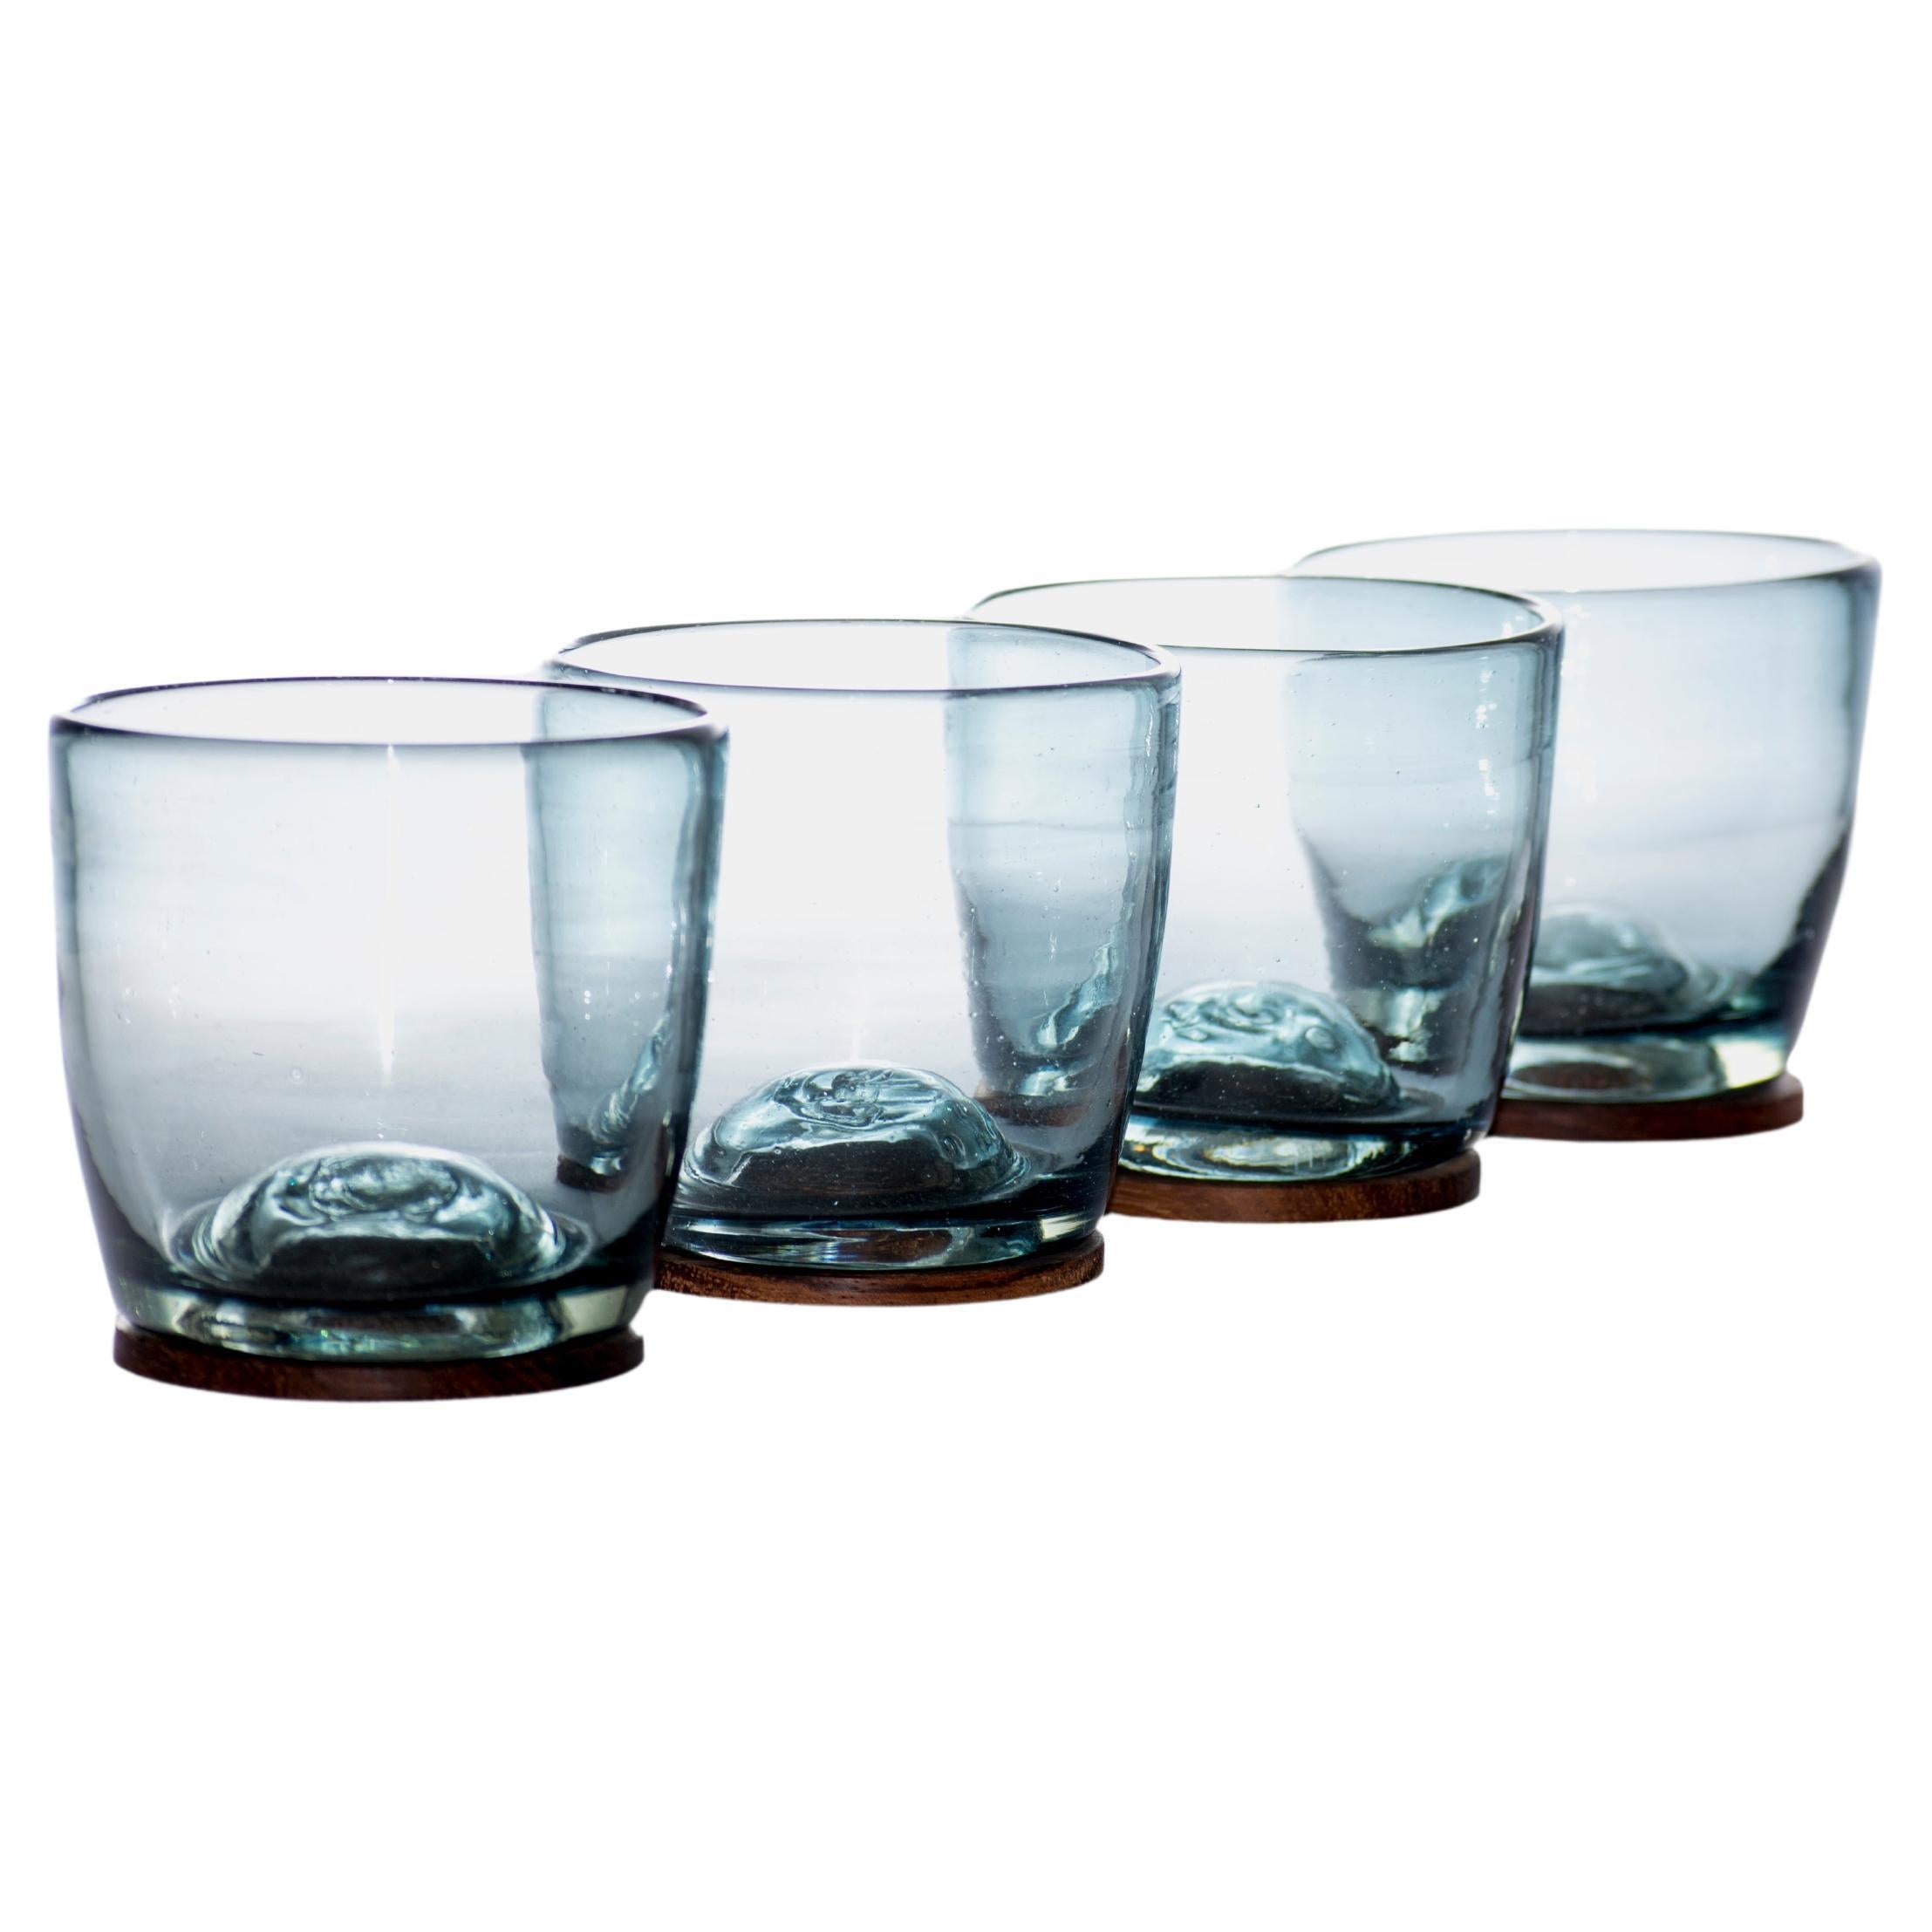 4 Piece Set of Grey Hand Blown Glasses with Parota Wood Coasters For Sale